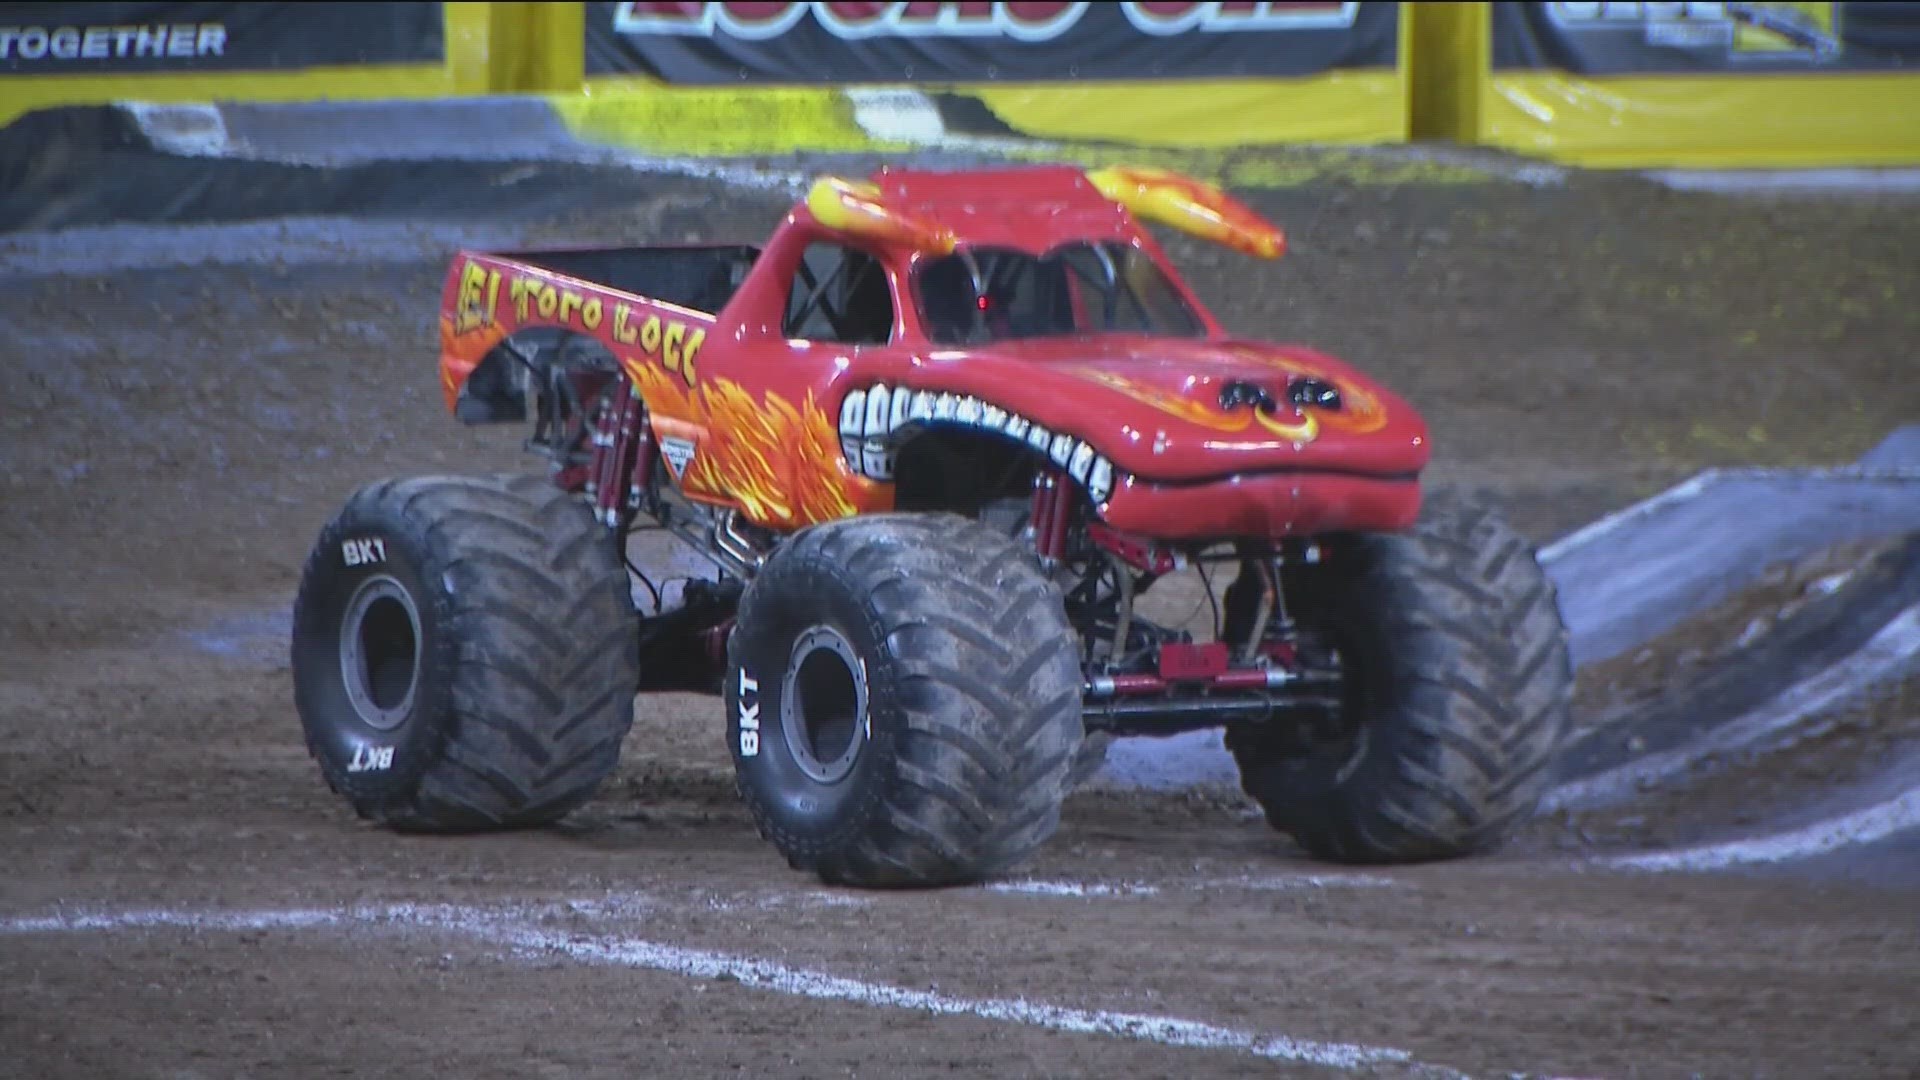 Monster Jam is back at Snapdragon Stadium this weekend with an unforgettable motorsport experience for the whole family.